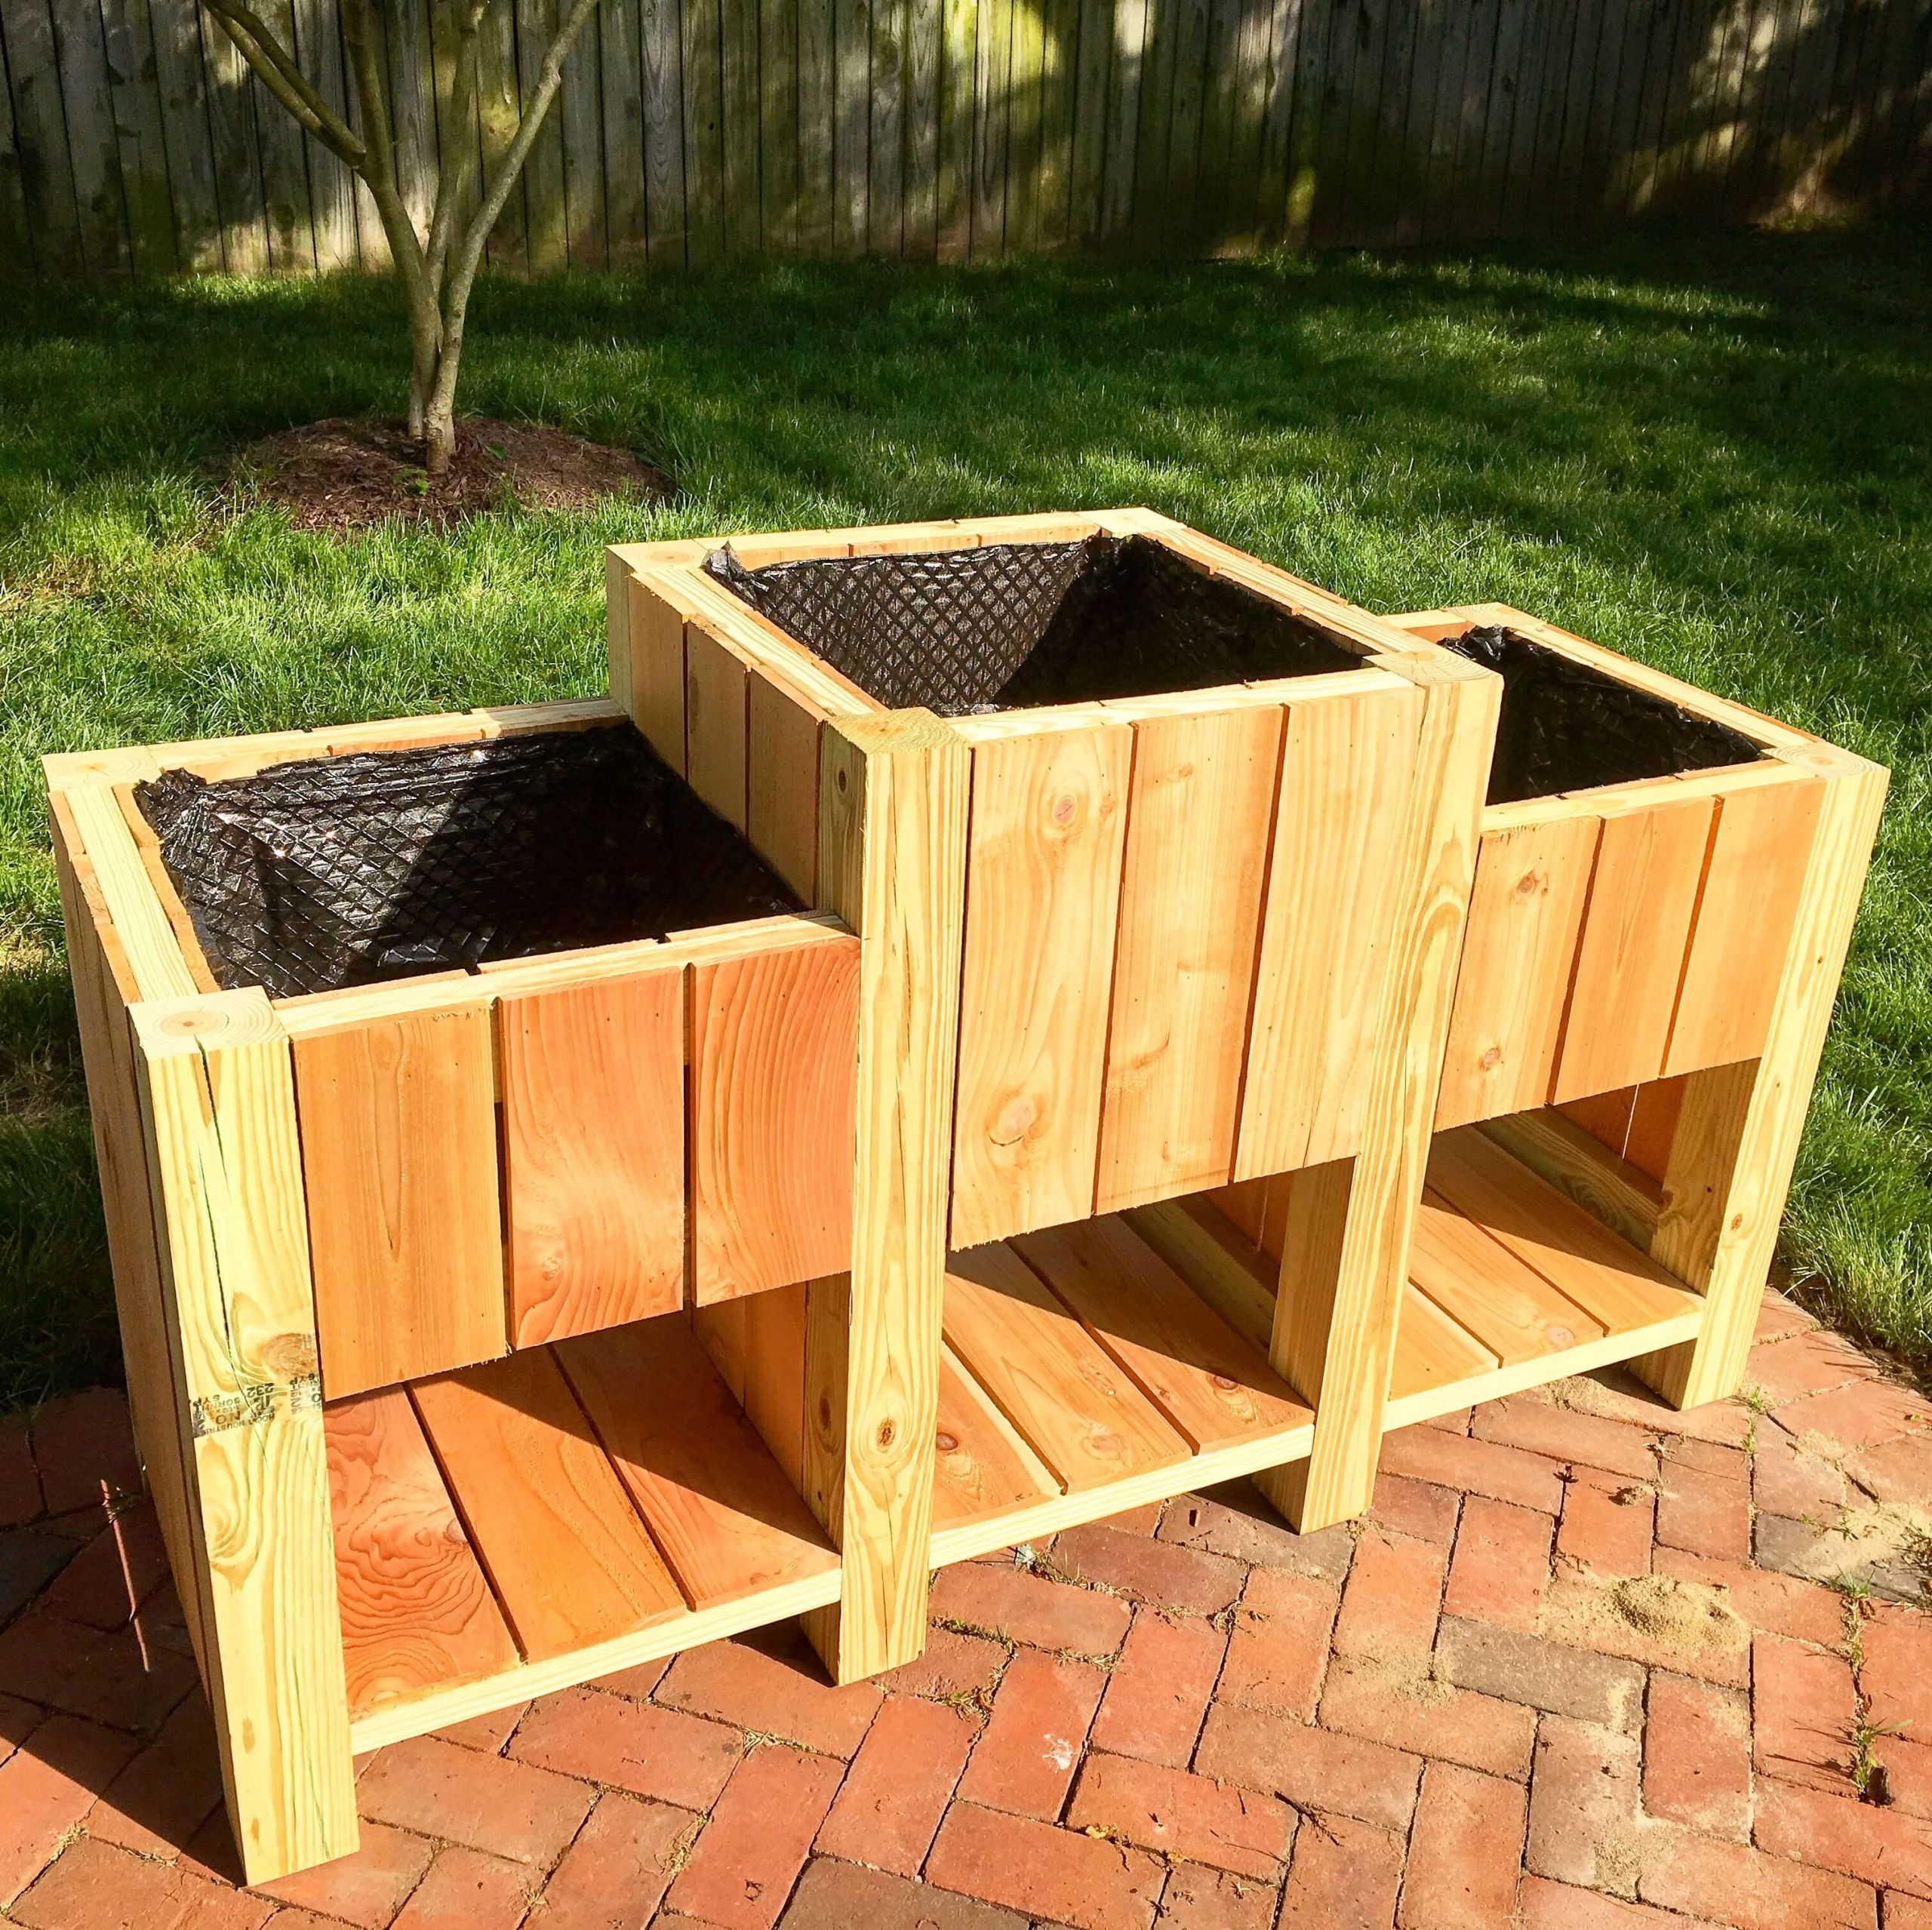 DIY Elevated Planter Box
 37 Outstanding DIY Planter Box Plans Designs and Ideas